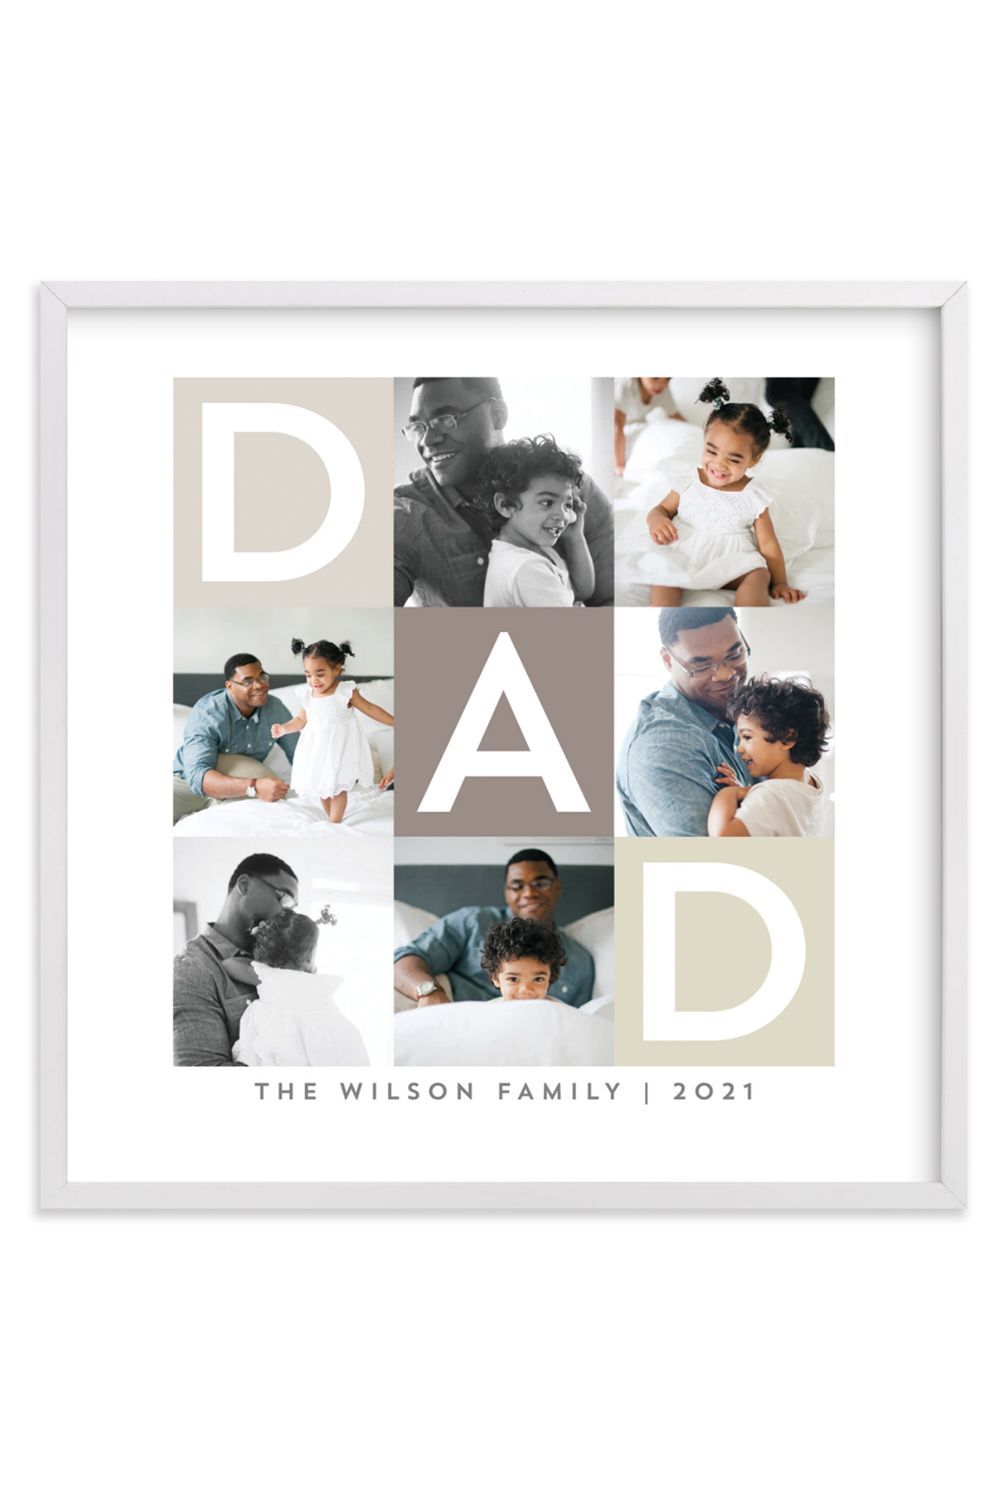 Daddy Photo Collage Gift  Father's Day  Birthday  Gift for dad  Gift for him  new dad  Personalised